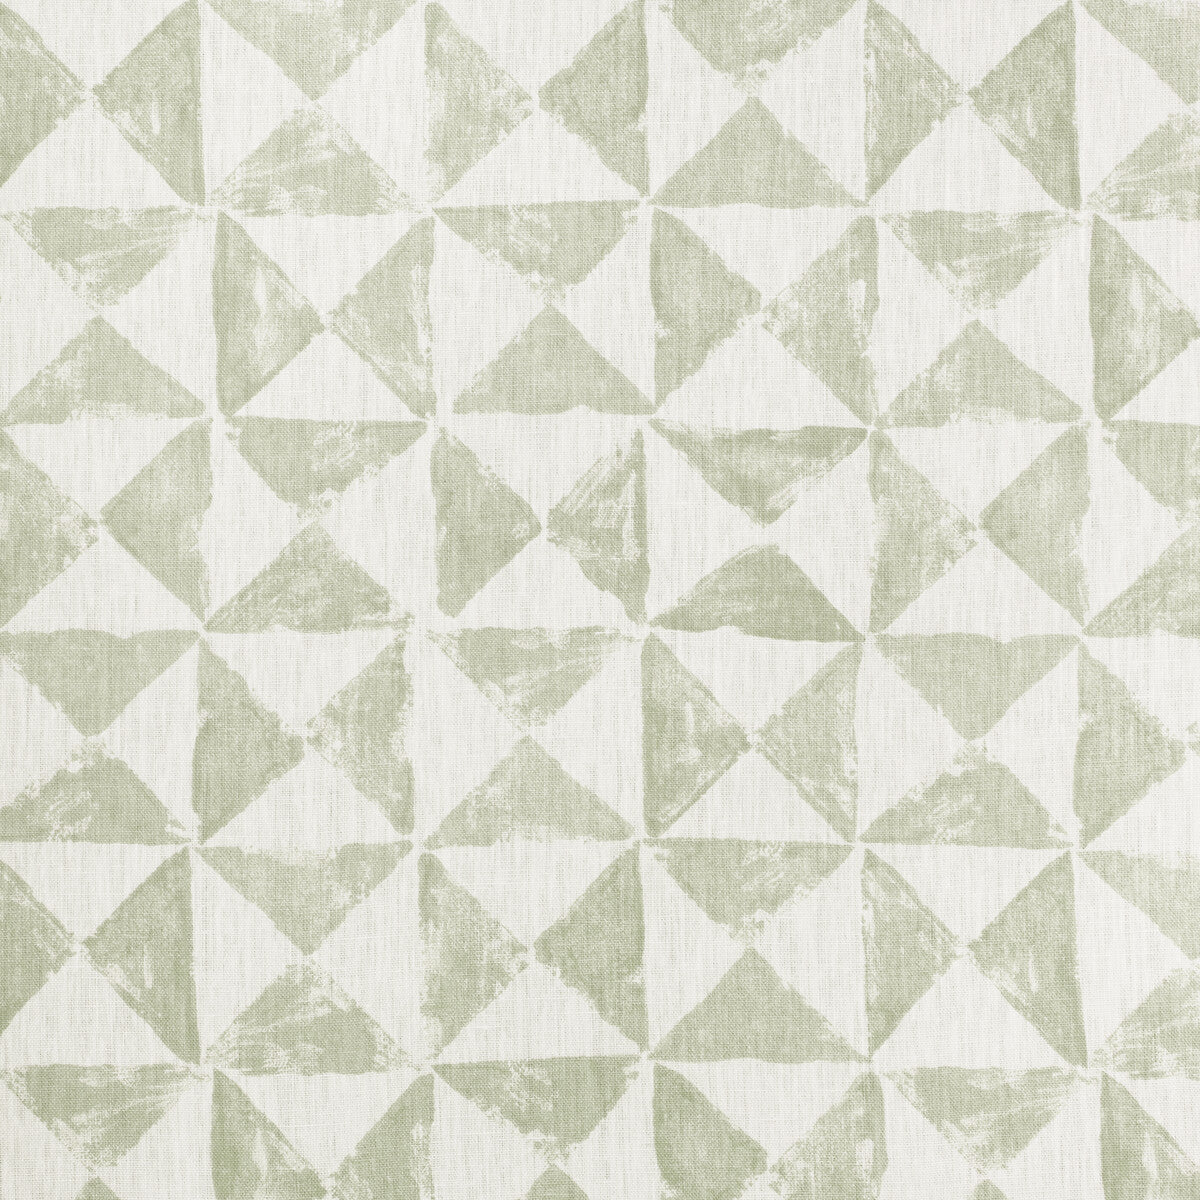 Triquad fabric in sand color - pattern TRIQUAD.161.0 - by Kravet Basics in the Small Scale Prints collection